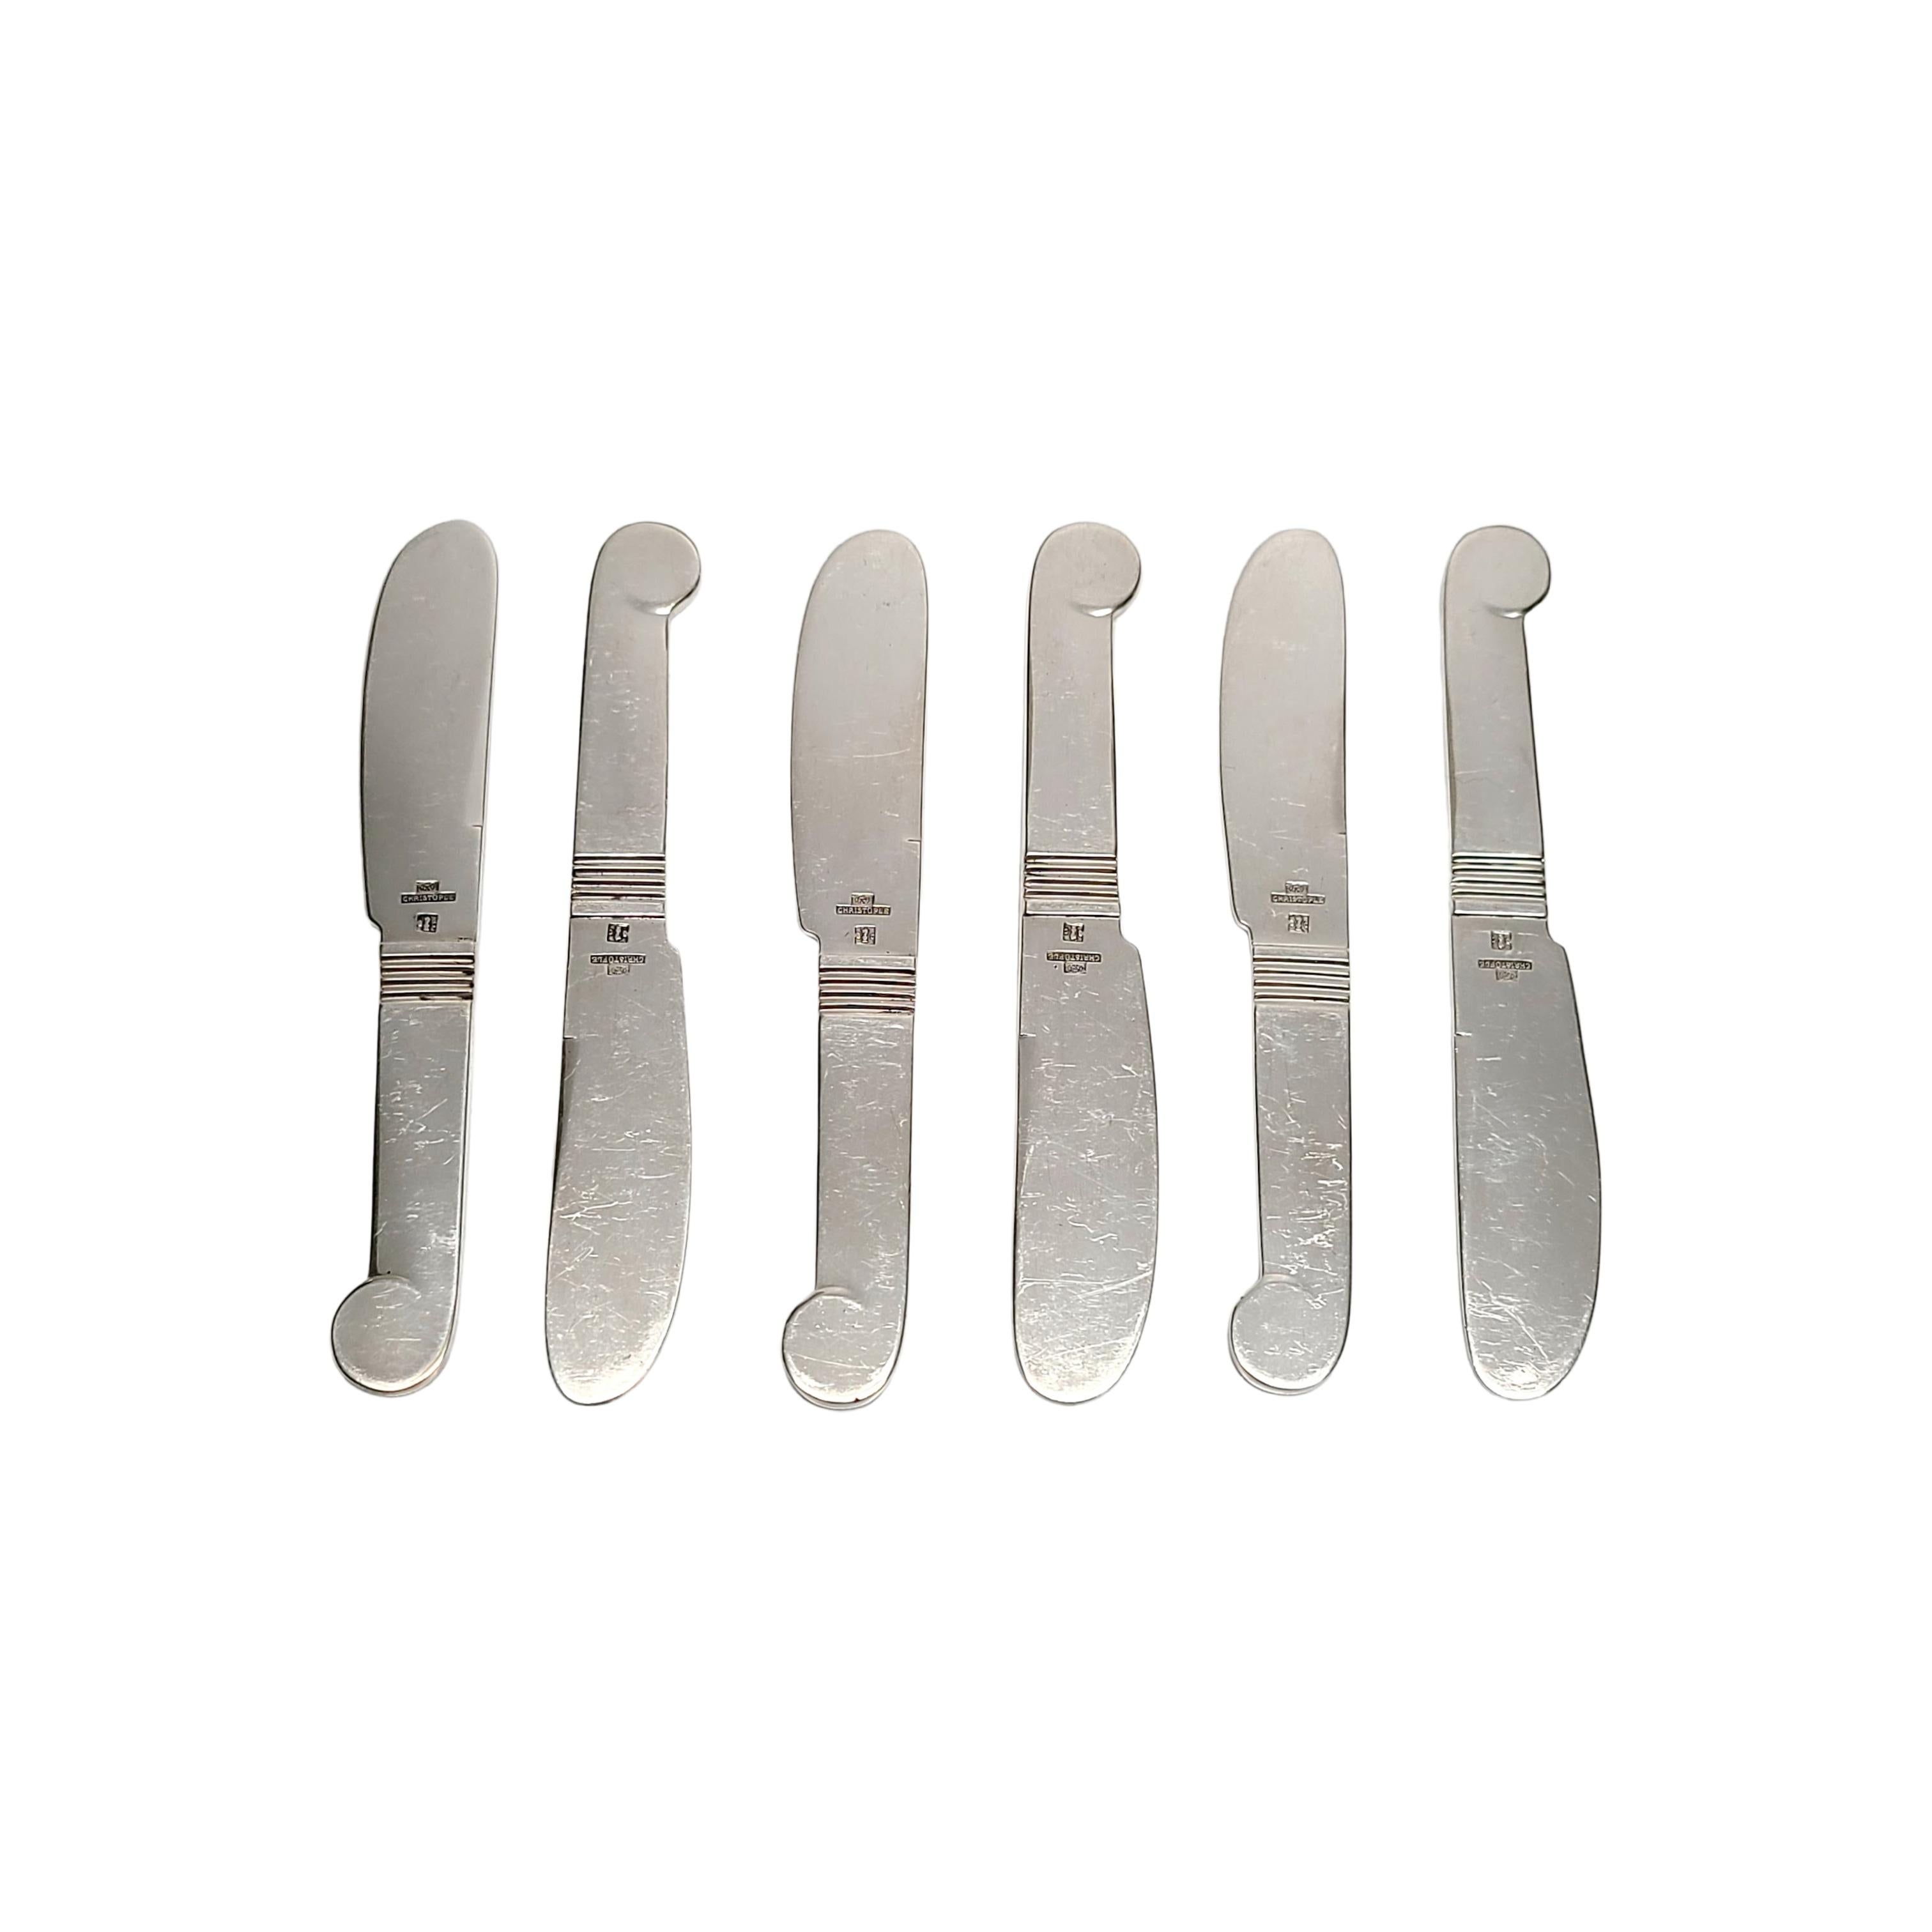 Set of 6 vintage silver plate Pate/Caviar/Butter Knives in Luc Lanel pattern by Christofle.

The Luc Lanel pattern is a simple and elegant design featuring a swirl design at the end of each handle.

Measures 3 7/8